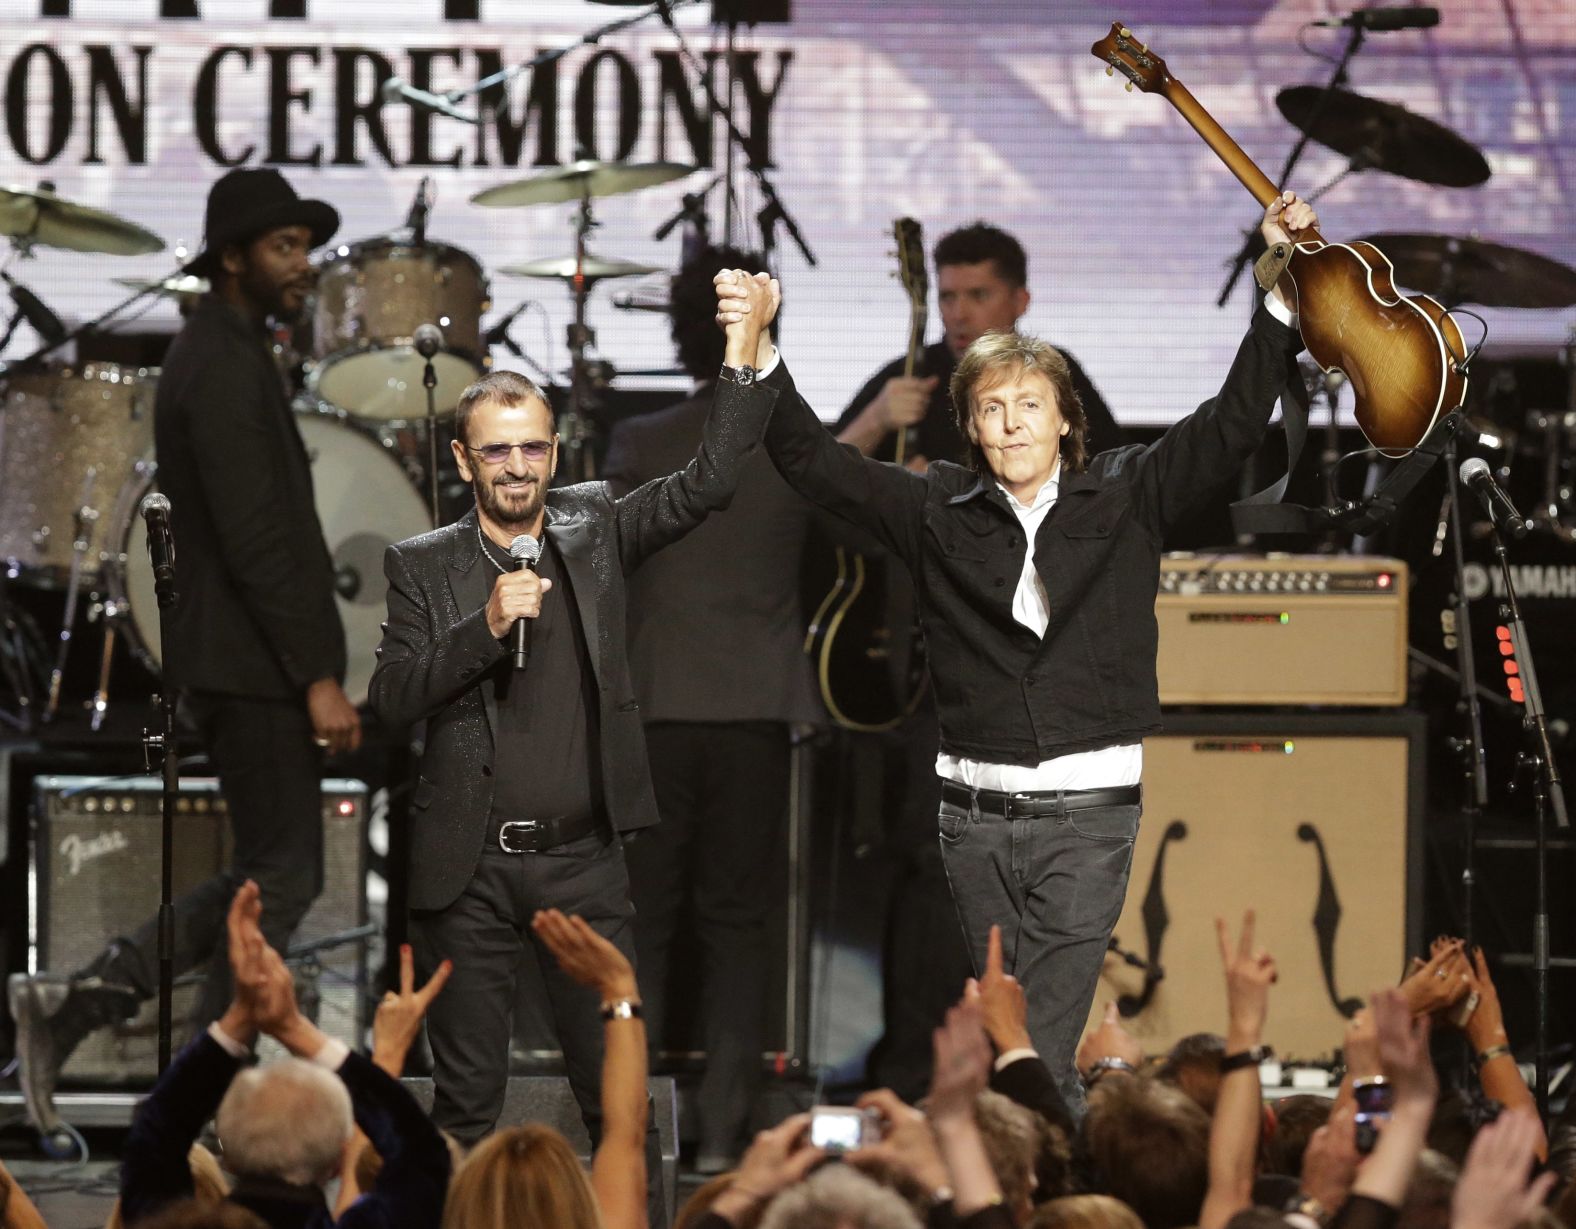 Starr and McCartney acknowledge the crowd at the Rock and Roll Hall of Fame induction ceremony in 2015. Starr was already in the Hall of Fame as a member of the Beatles, but this time he was being inducted as a solo artist.